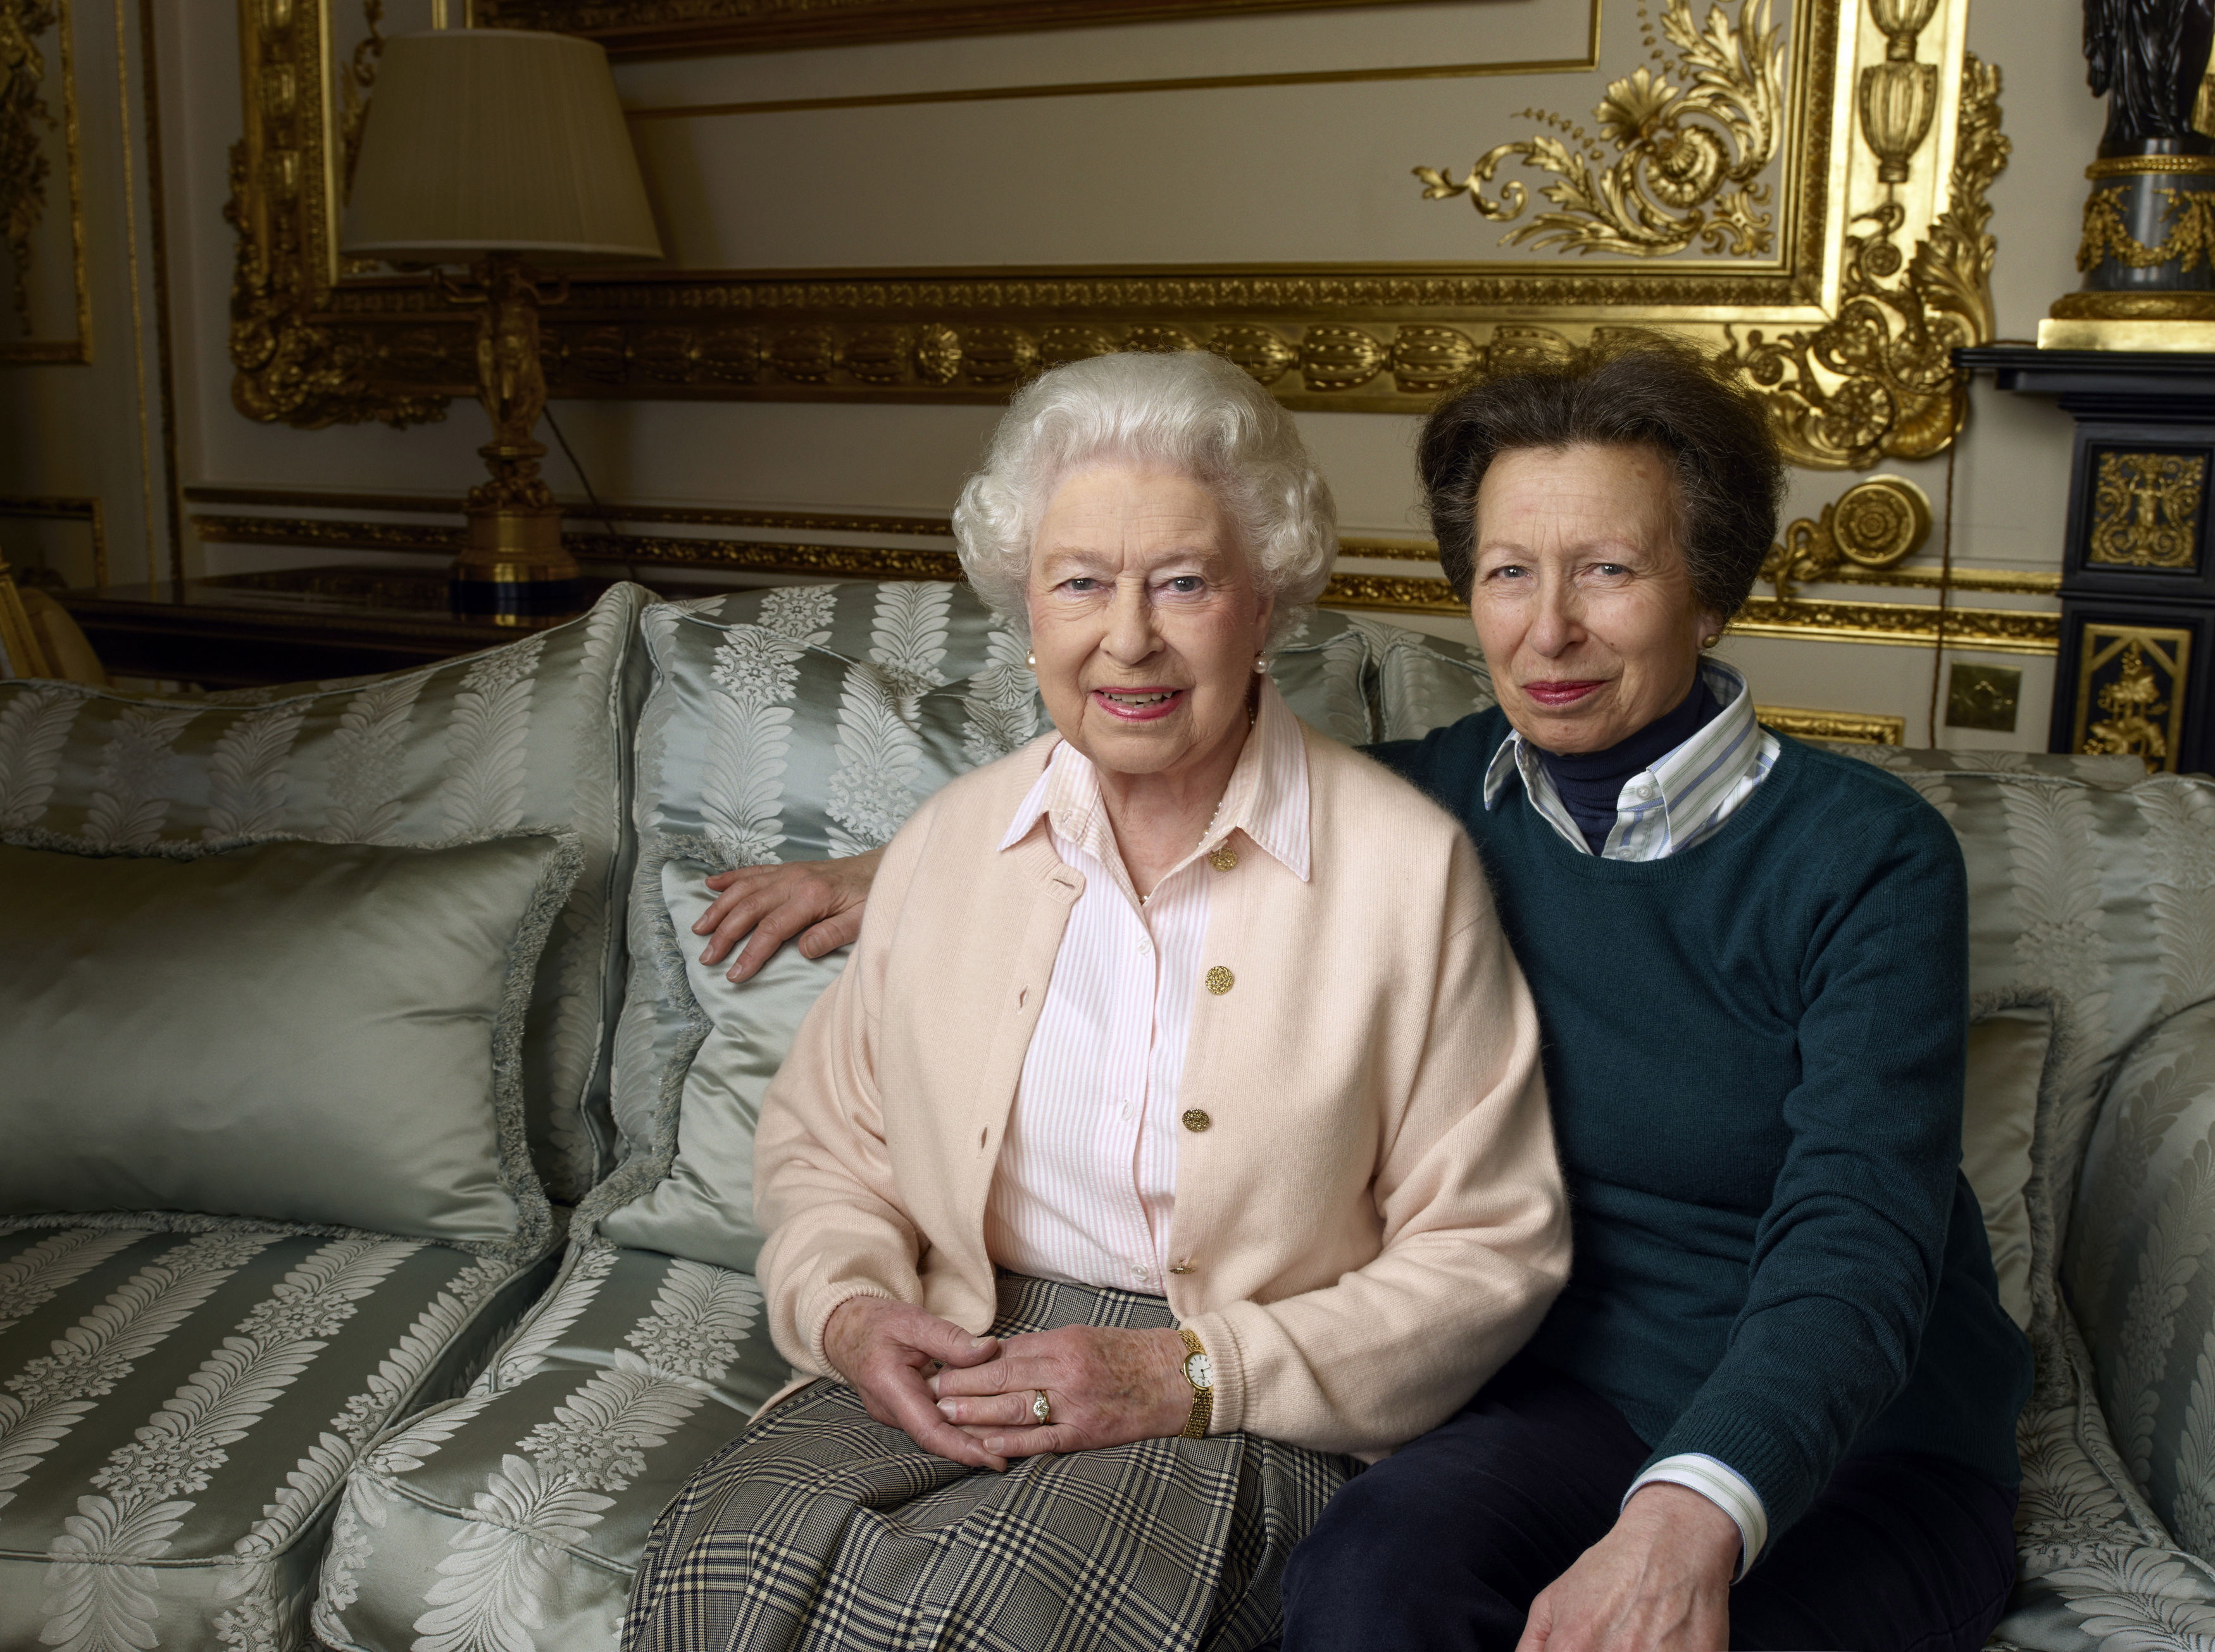 THE QUEEN AND THE PRINCESS ROYAL. Queen Elizabeth II is pictured with her daughter, Anne, the Princess Royal, in the White Drawing Room at Windsor Castle. Photo from EPA/©2016 Annie Leibovitz/Handout UK and Ireland  